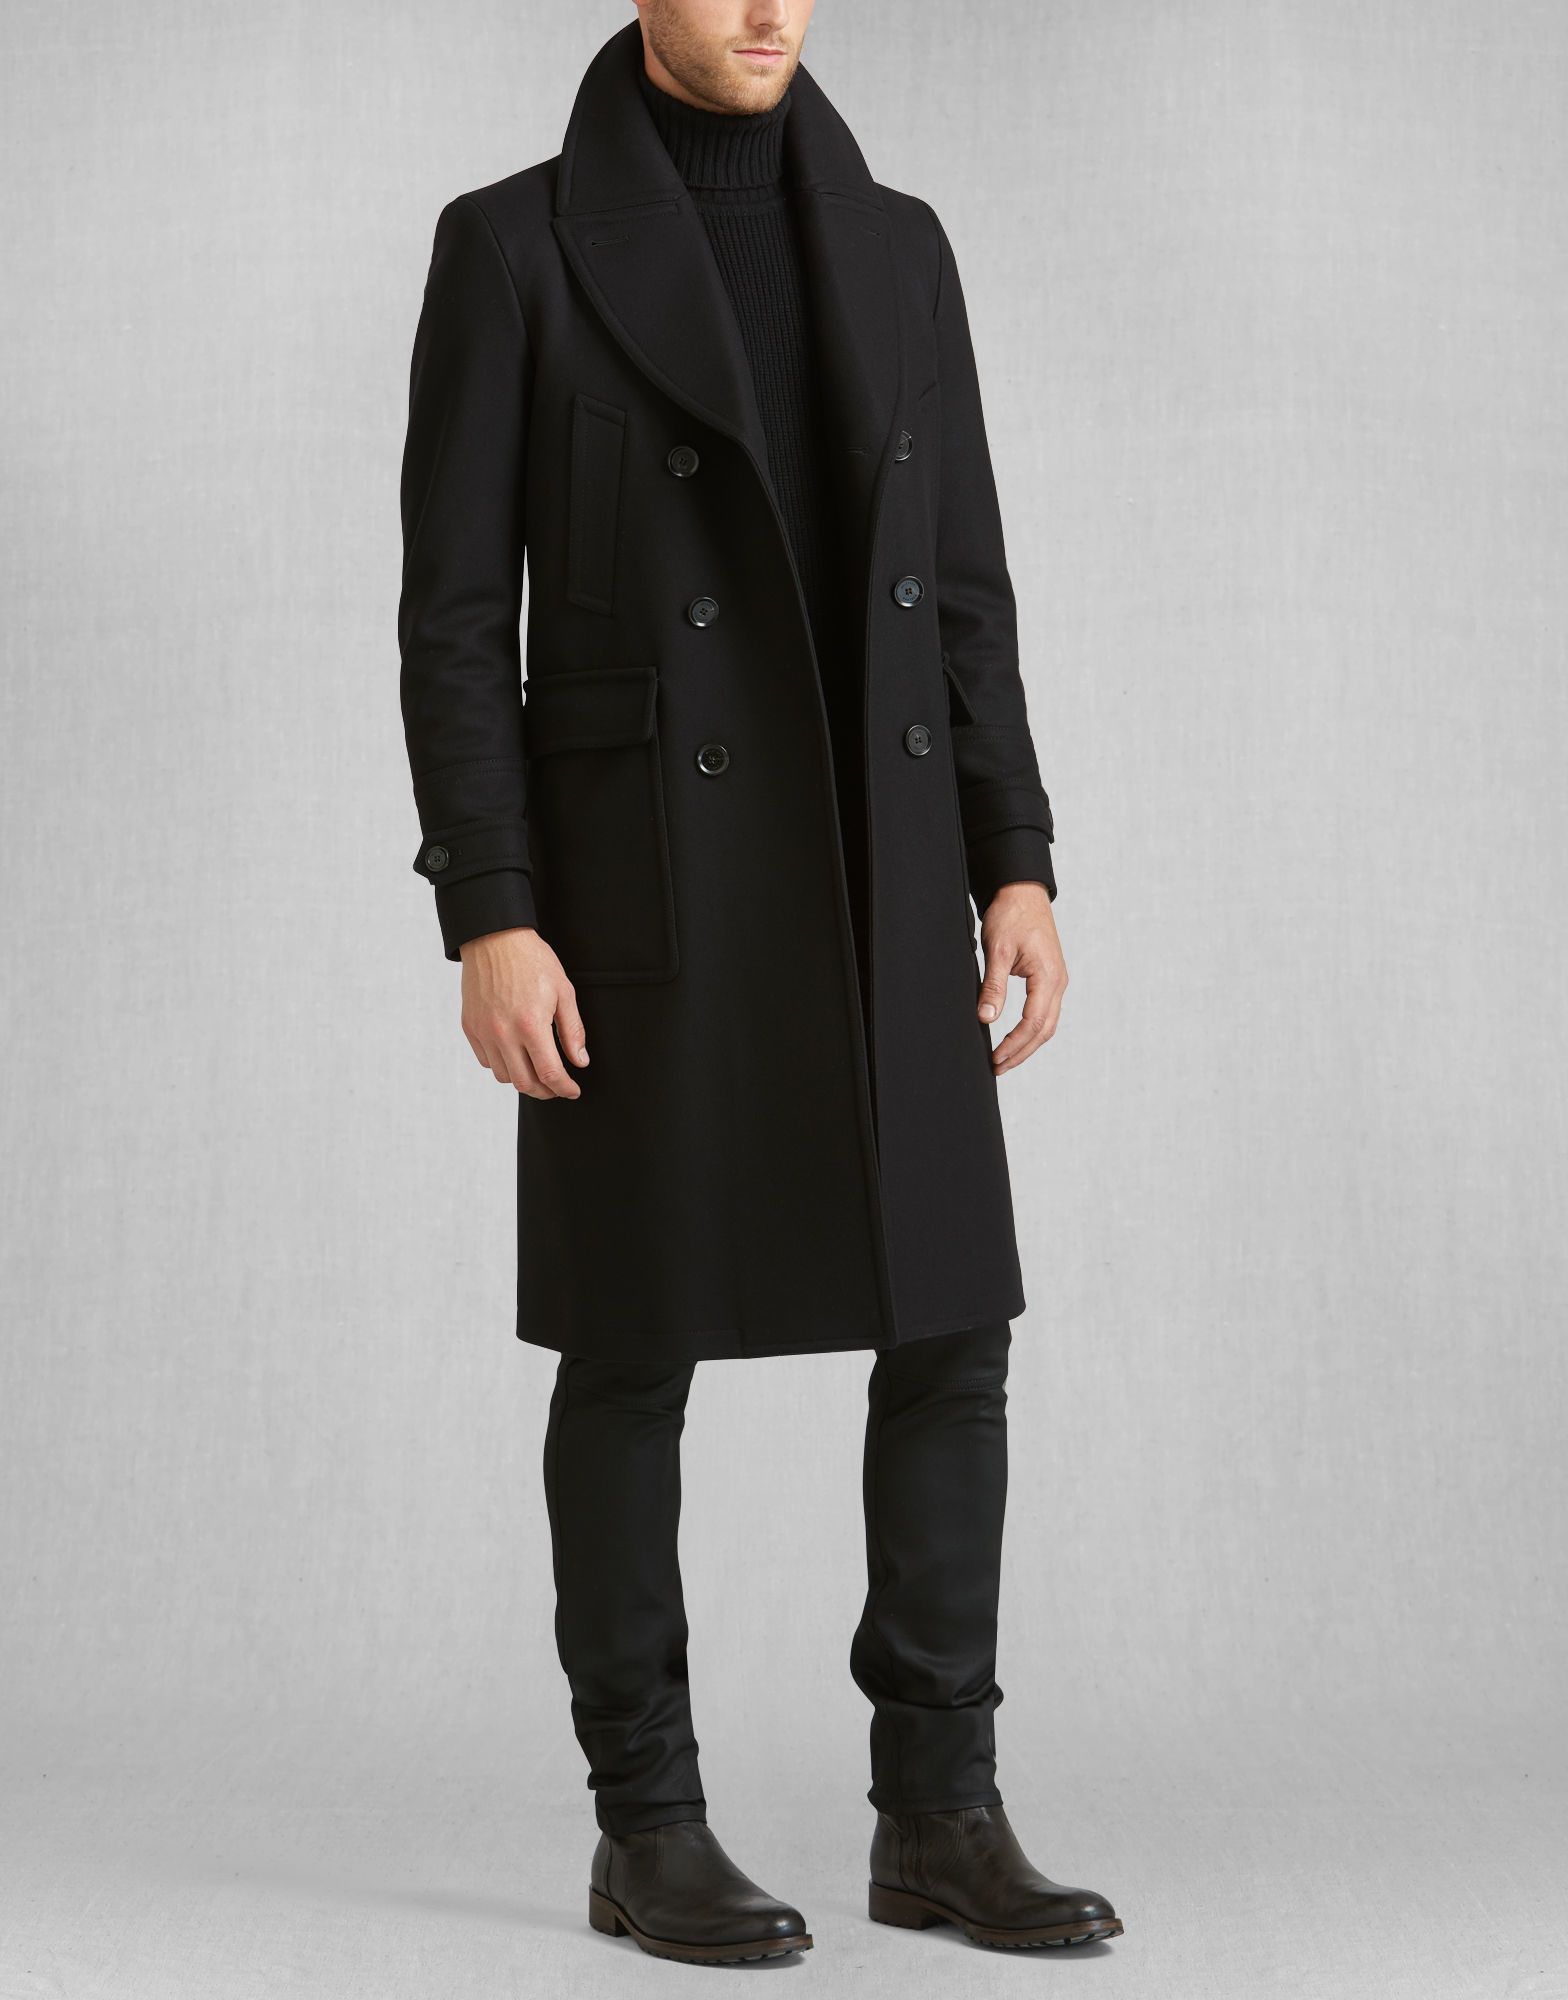 Belstaff Milford Wool and Cashmere-Blend Trench Coat in Black for Men - Lyst